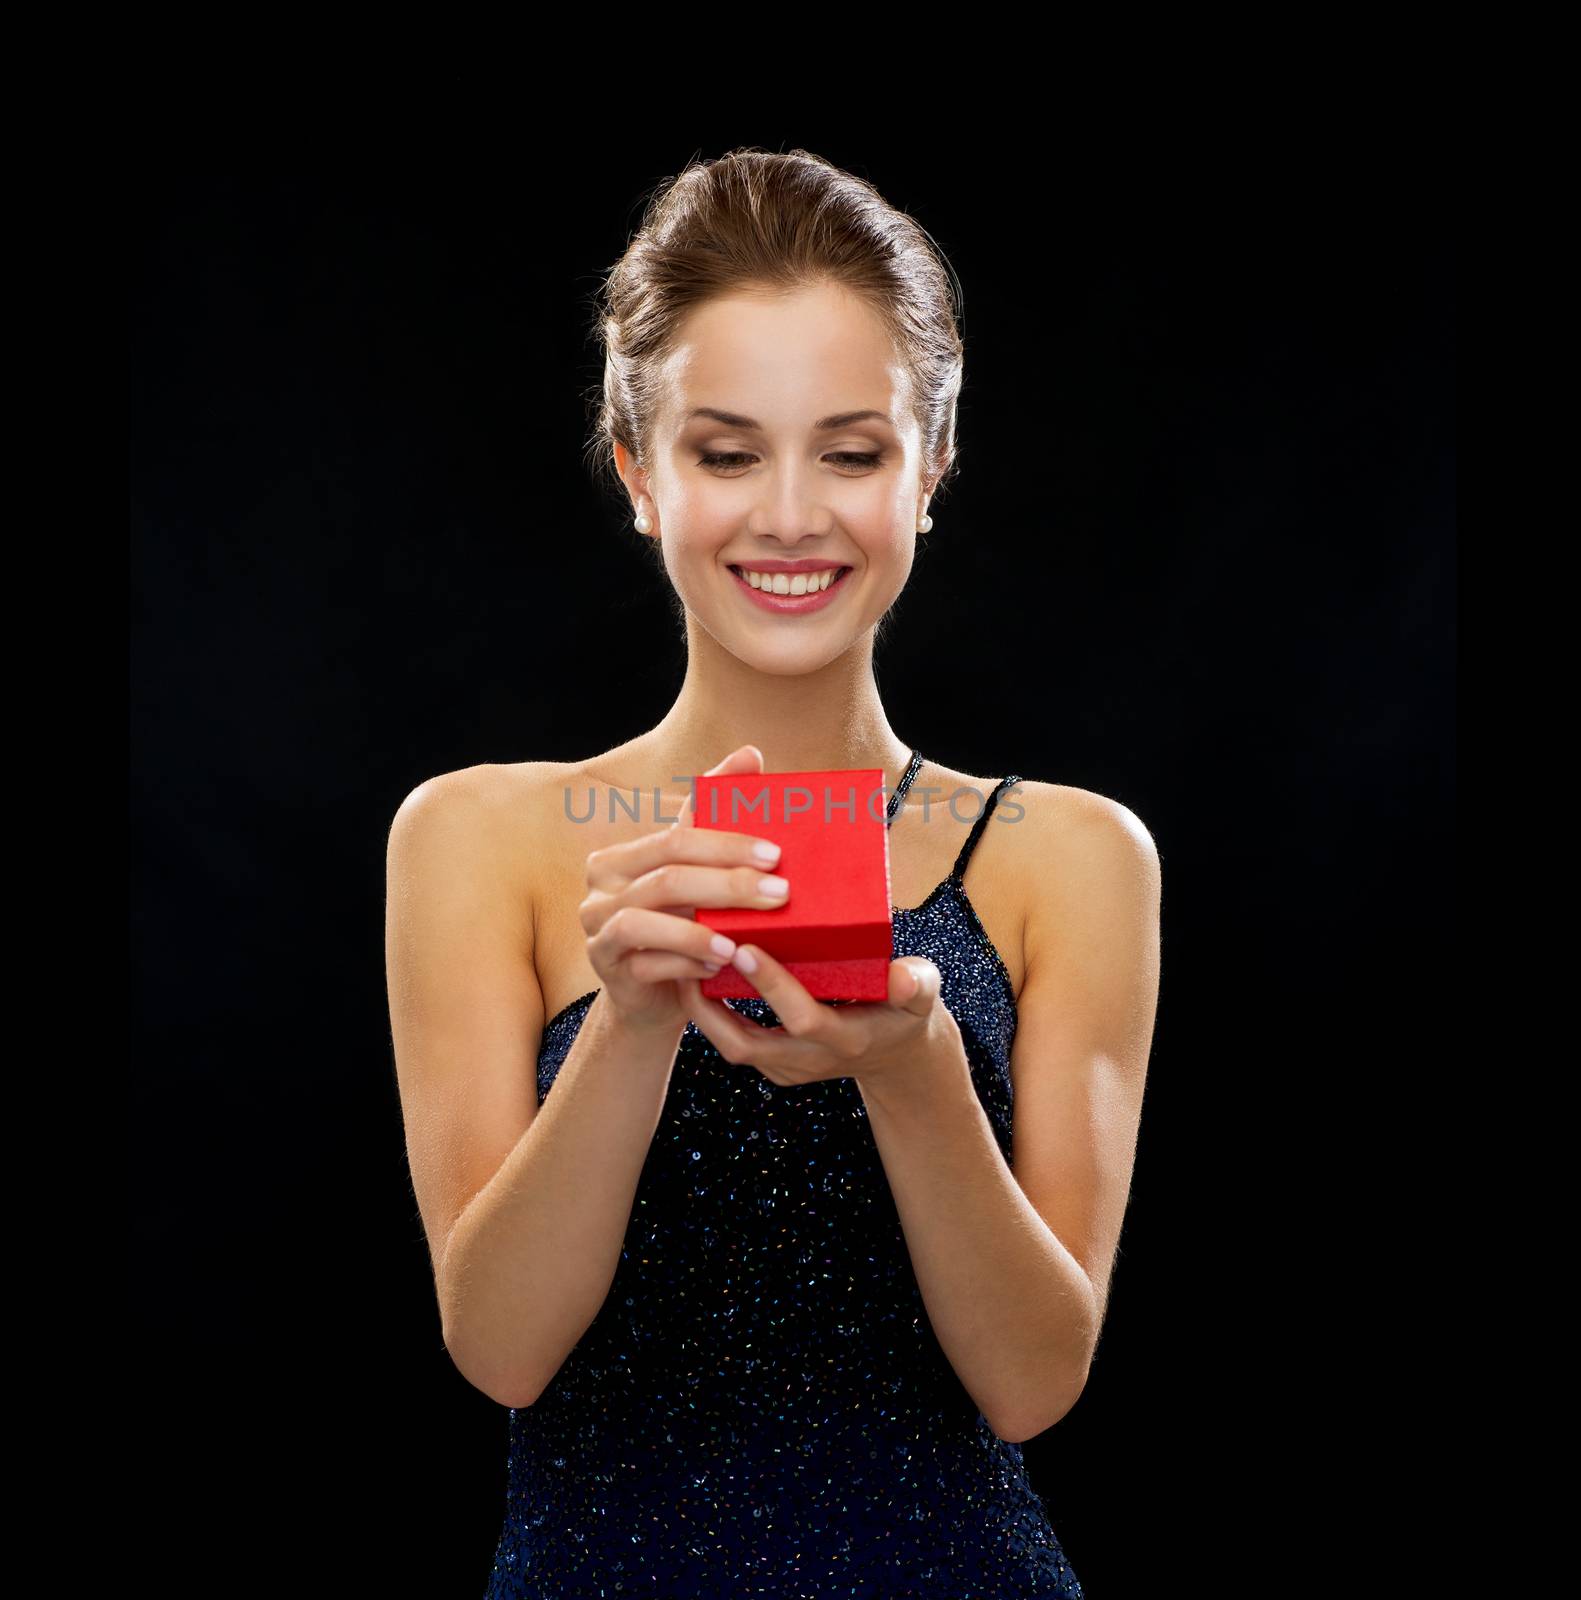 holidays, presents, luxury and happiness concept - smiling woman in dress holding red gift box over black background